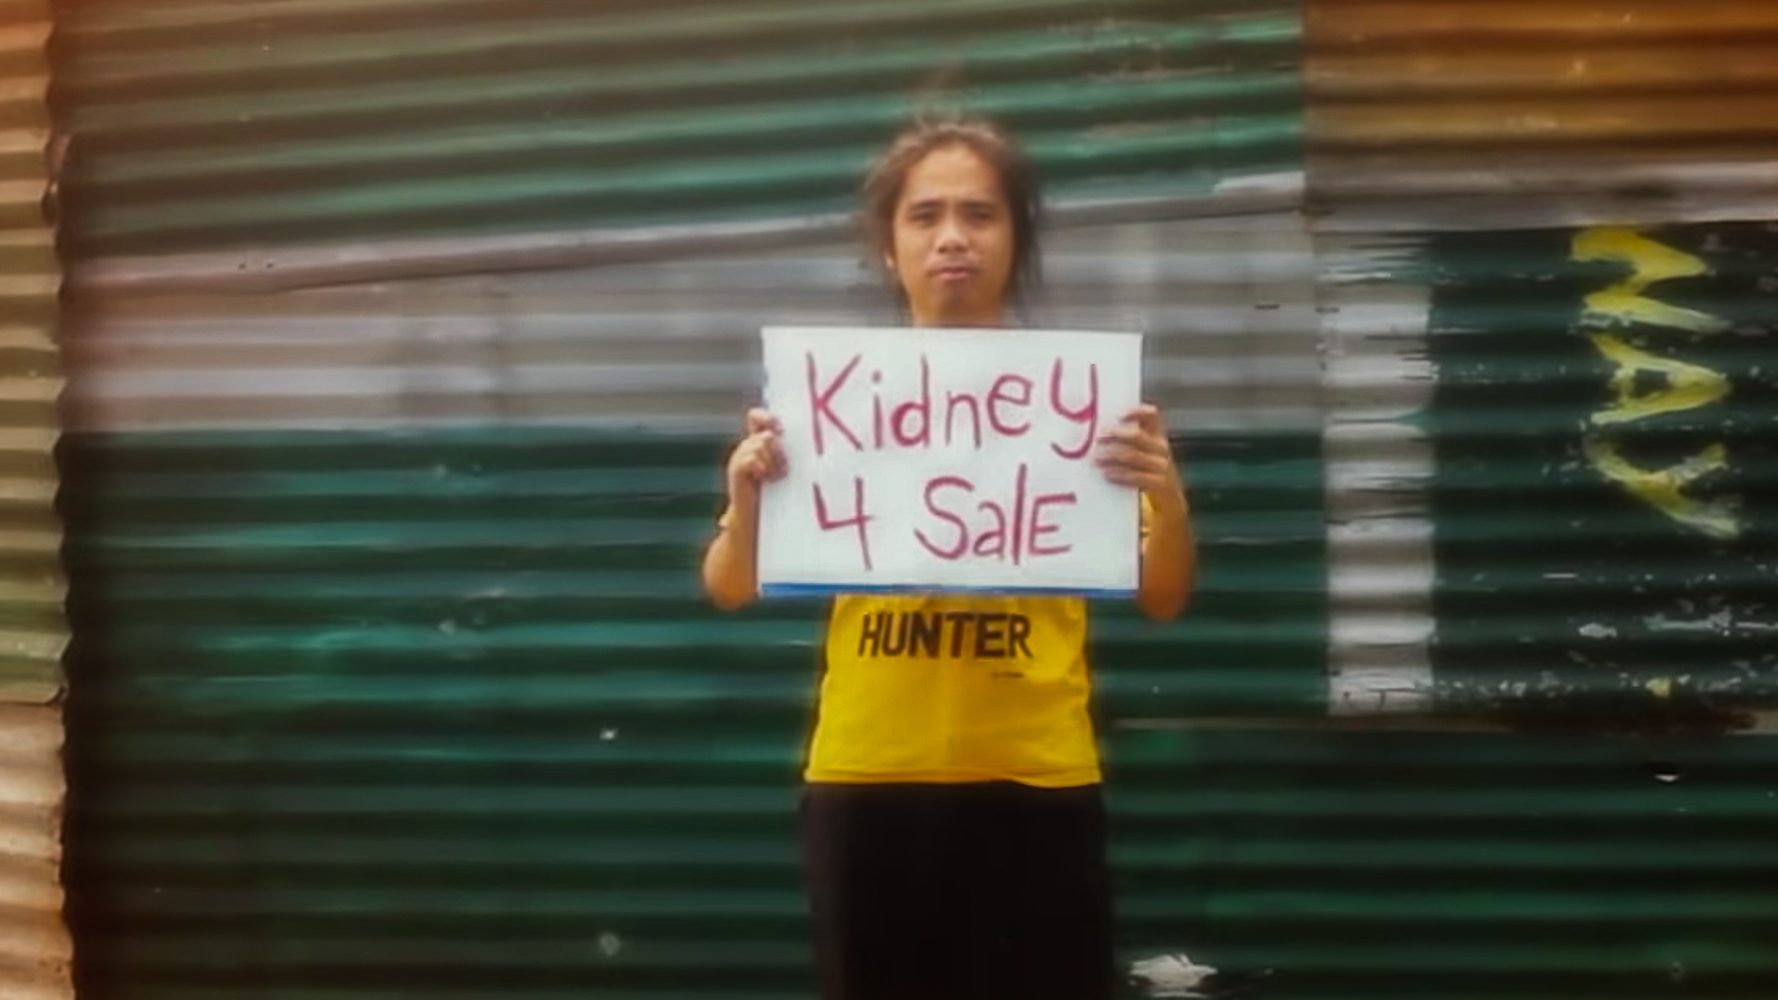 KIDNEY 4 SALE. To keep 'Sally' moving, direk Avid Liongoren needed to raise money for post-production. This is a screenshot from one of his YouTube videos asking fans to chip in to save 'Sally.'  